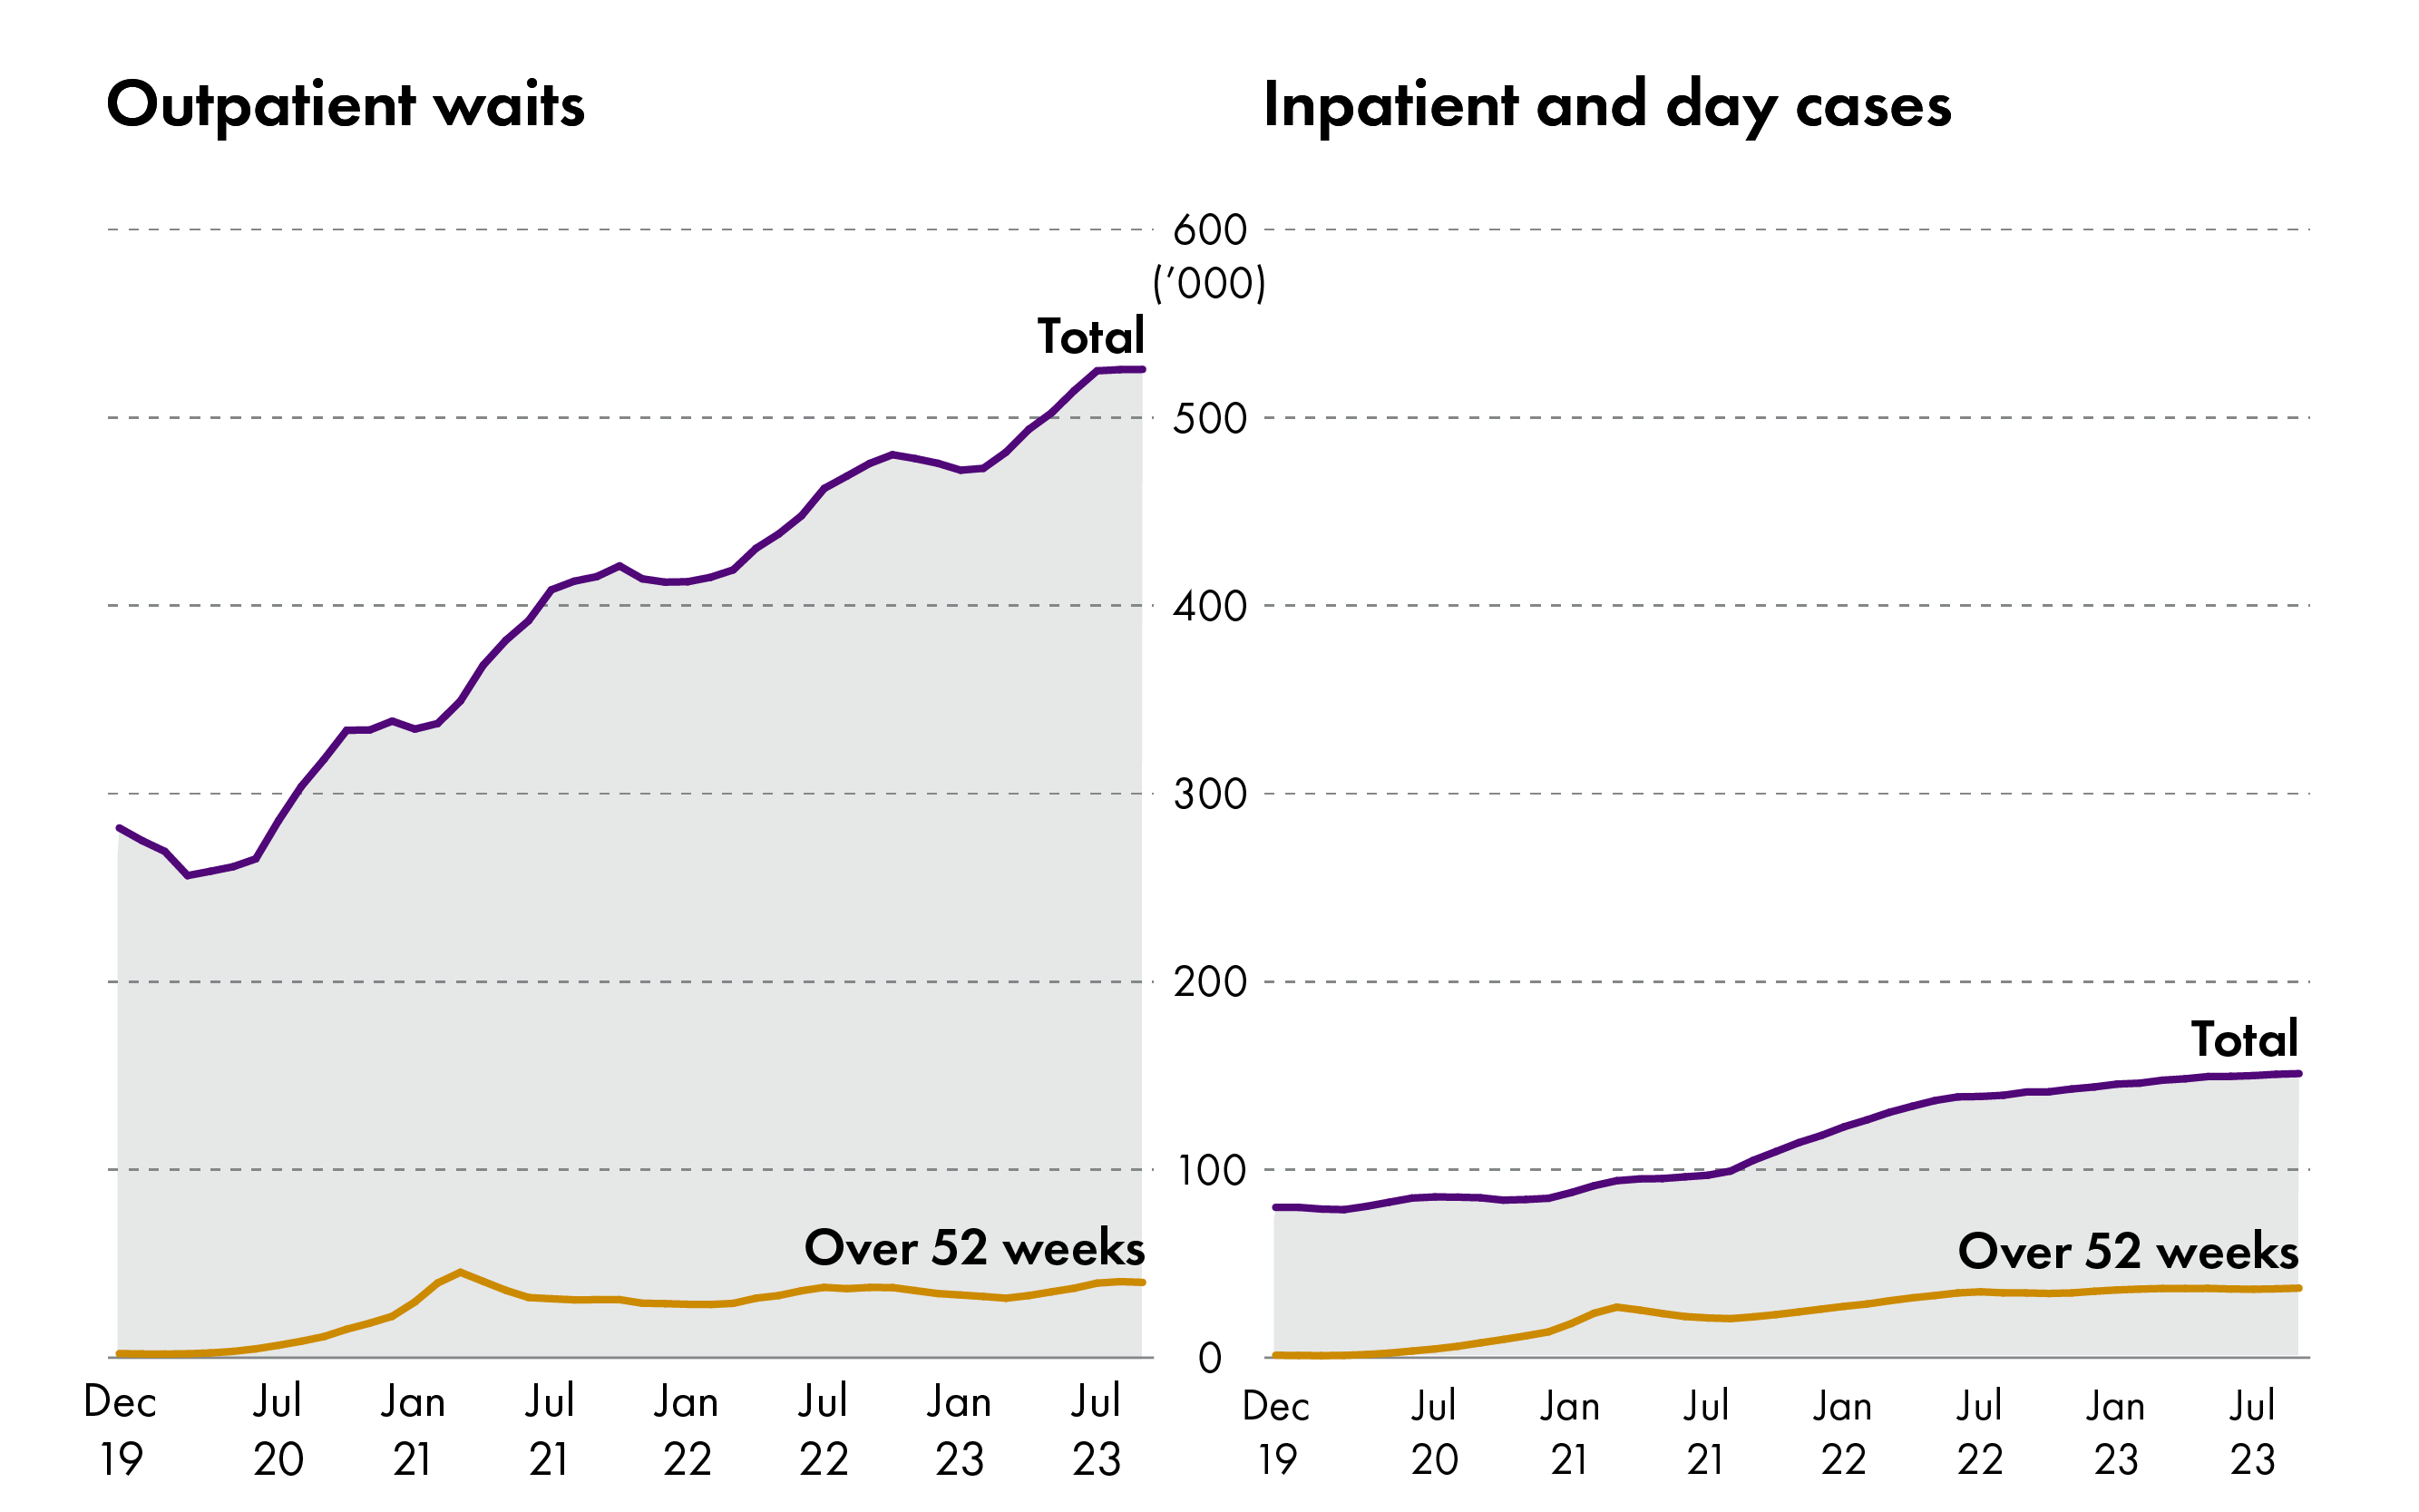 Two area charts side by side. The first chart shows the number of people on the outpatient waiting list has almost doubled since the start of the COVID-19 pandemic. The second chart shows that the number of people on the inpatient and day cases waiting list has also almost doubled since the start of the pandemic.